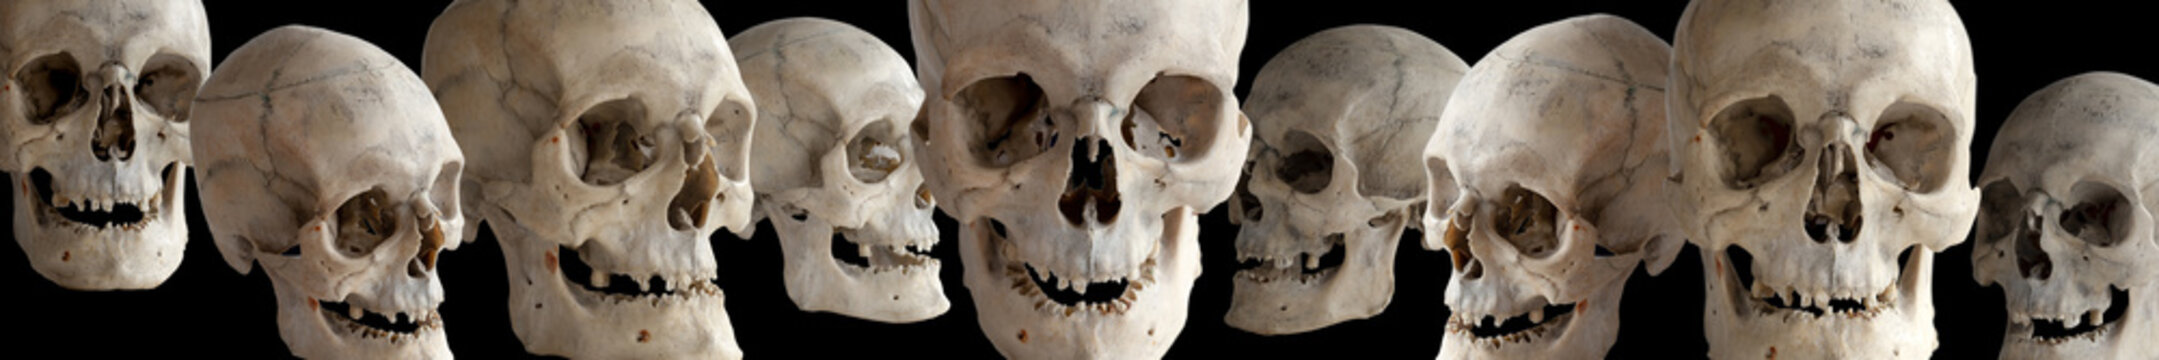 Human skulls at different angles on a black background. The header or footer of the image. Isolated on black.